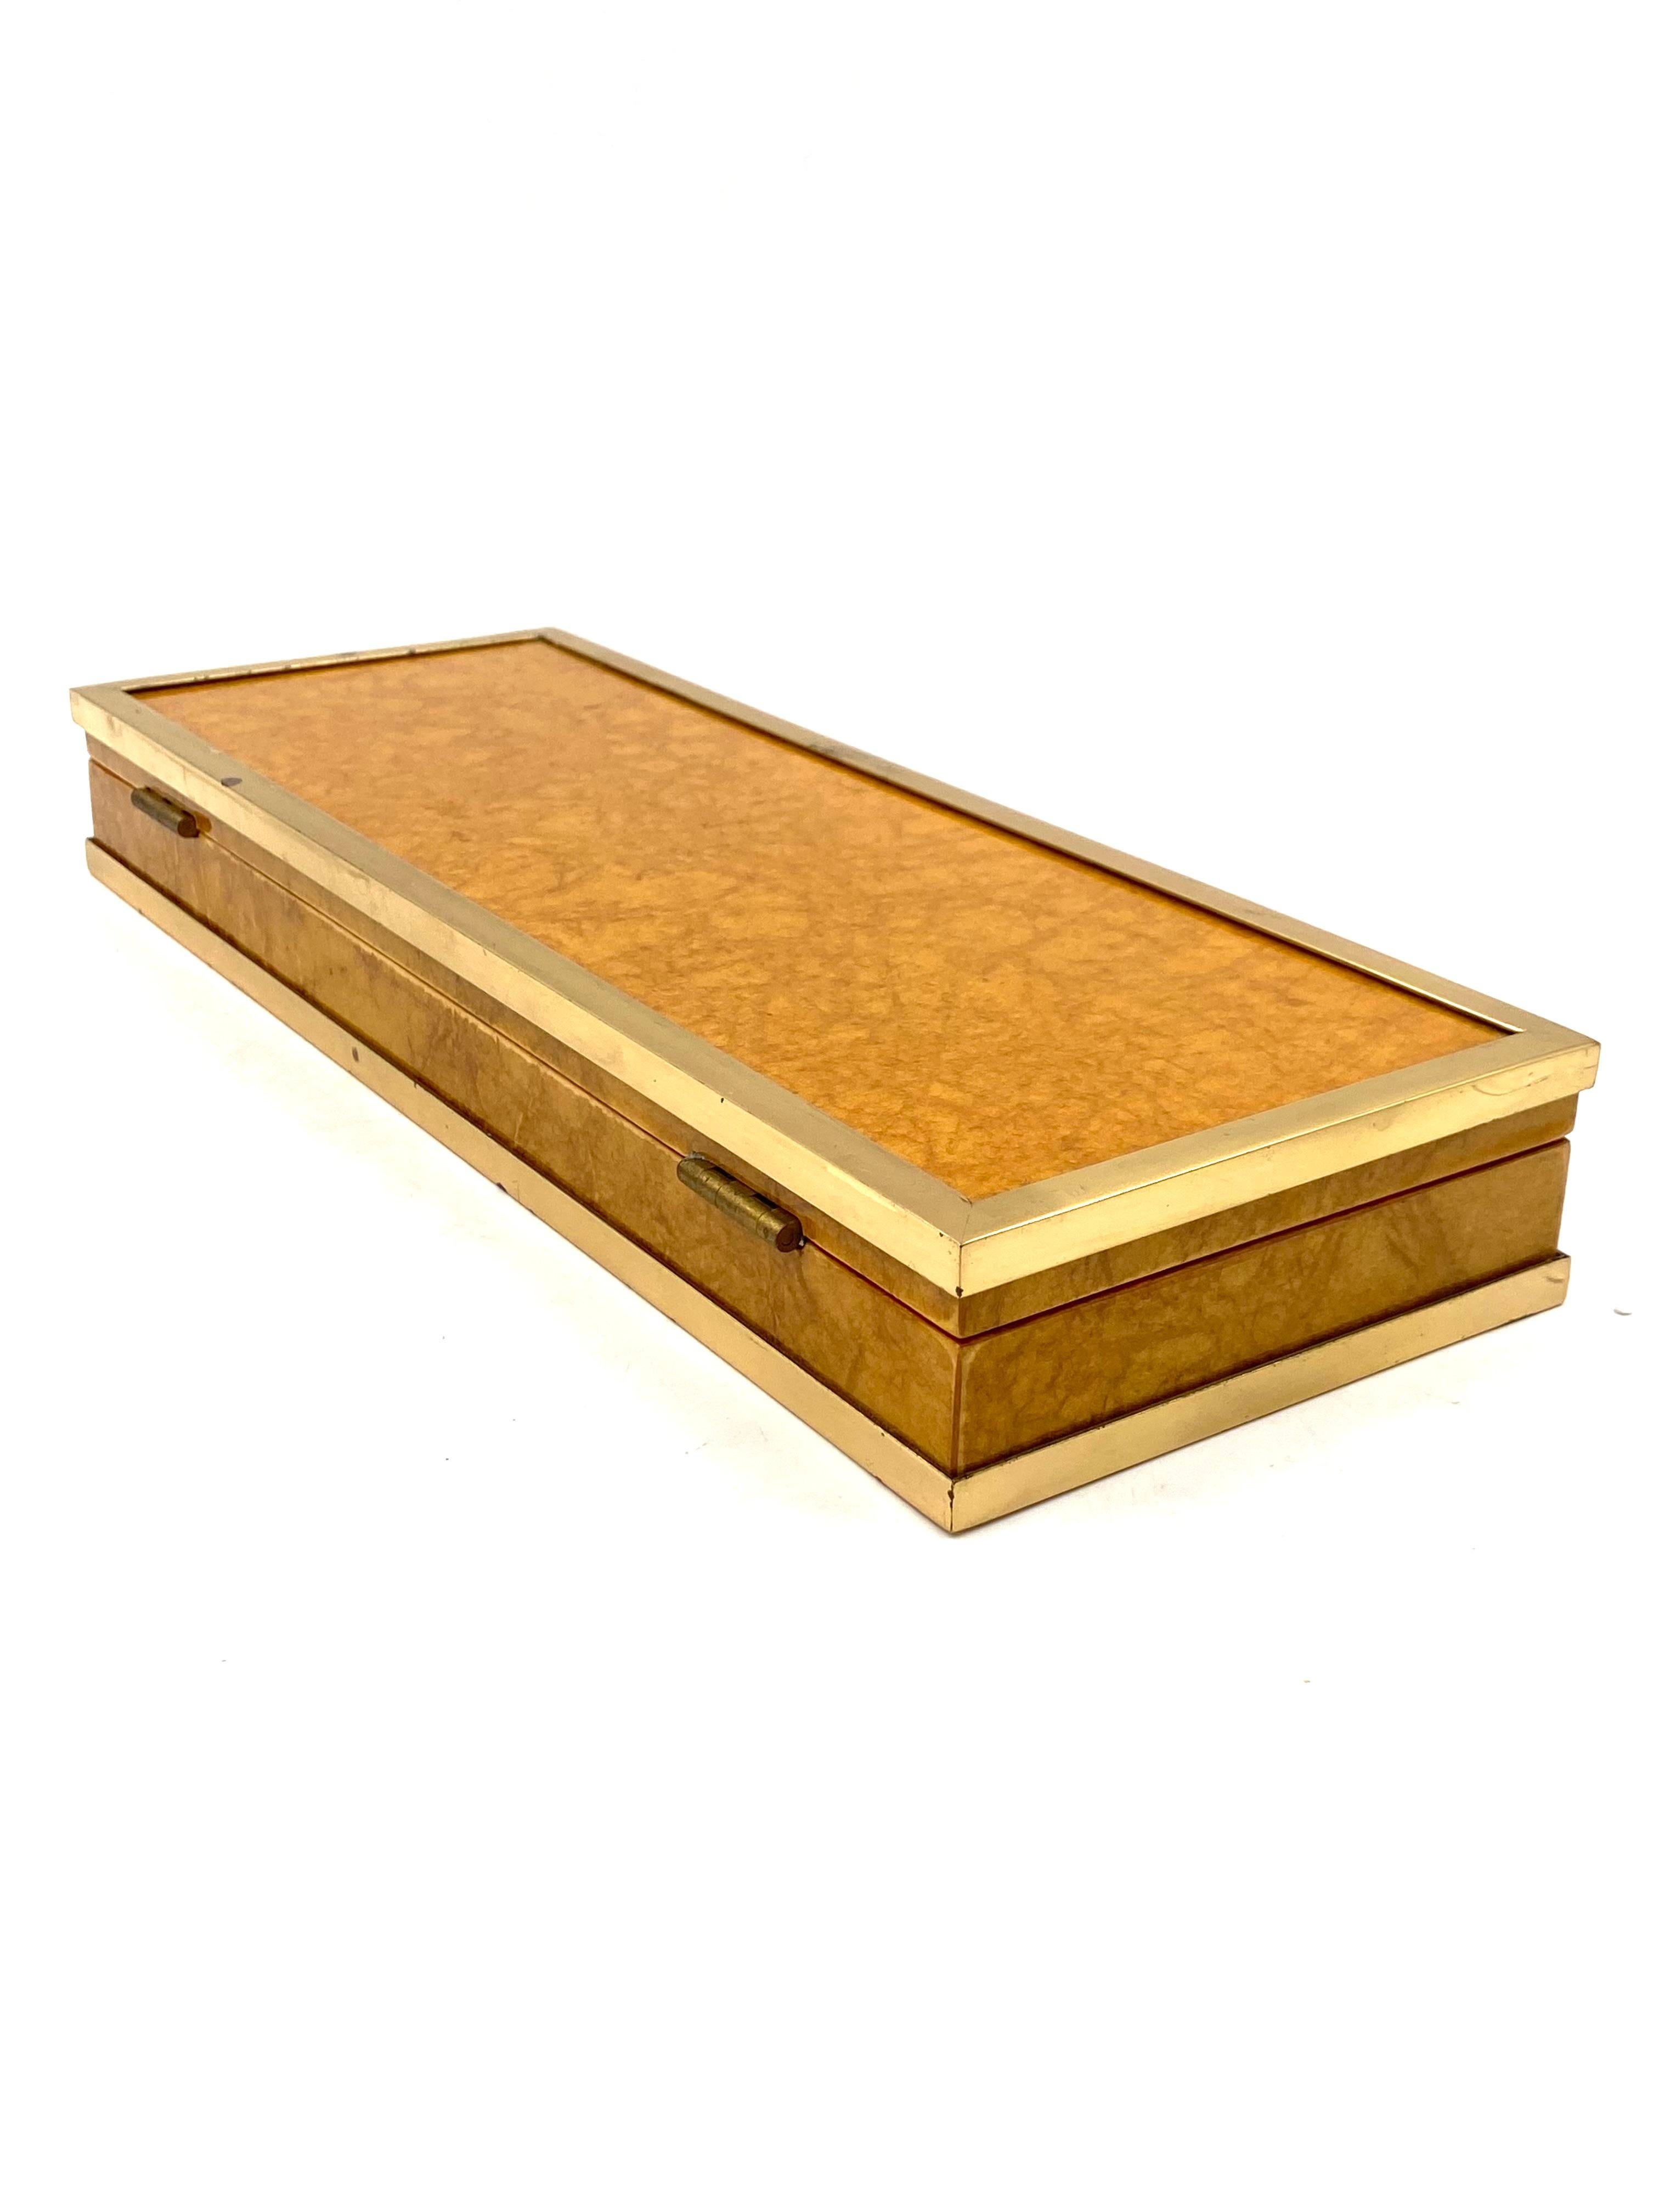 Tommaso Barbi, Wood and Brass Cigars Box, Italy, 1970 For Sale 7